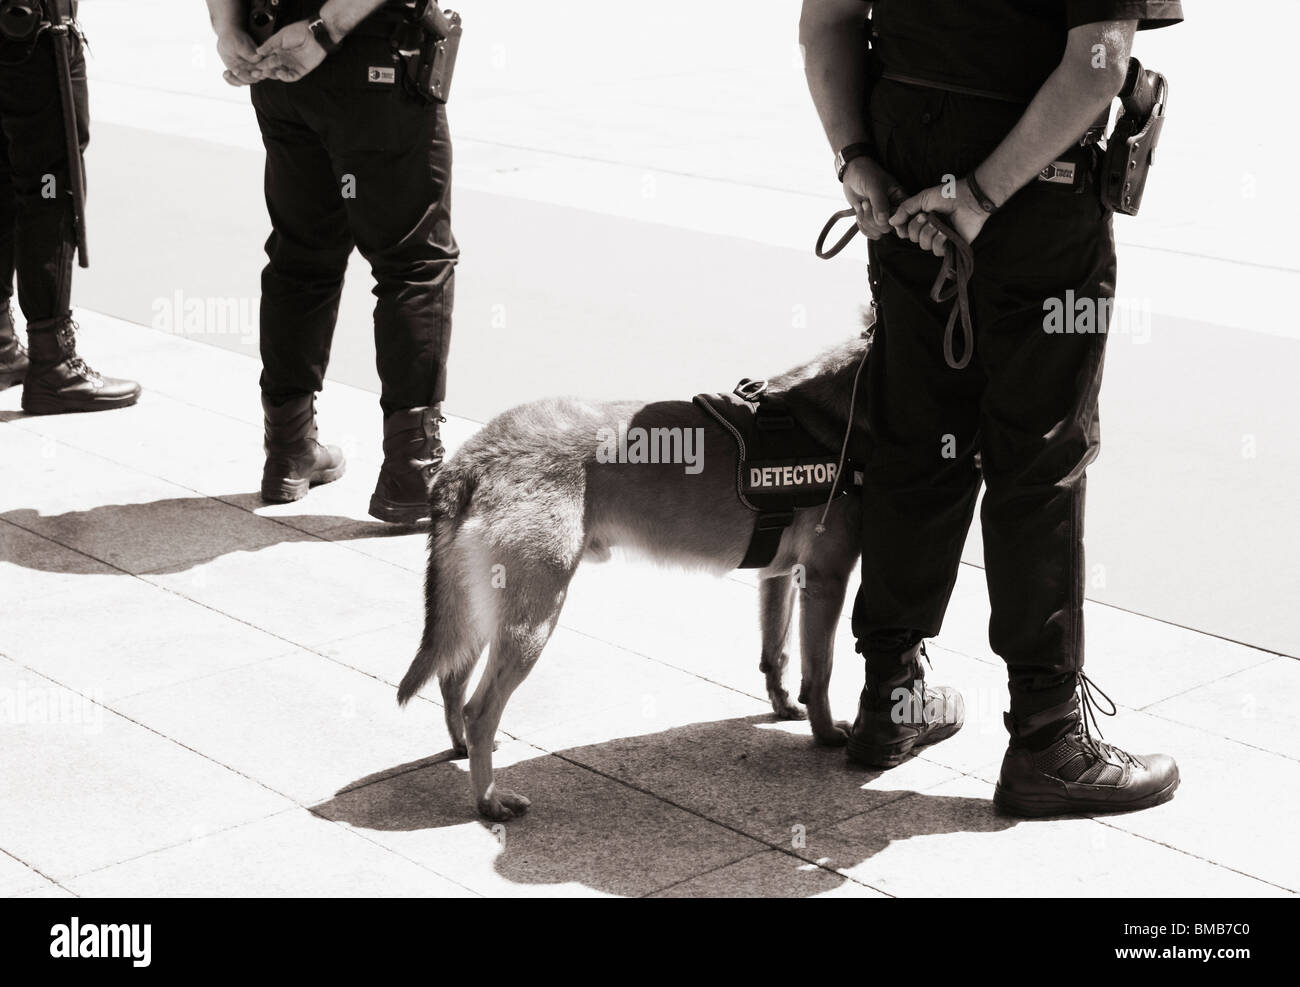 Armed Spanish police with detector dog on parade Stock Photo